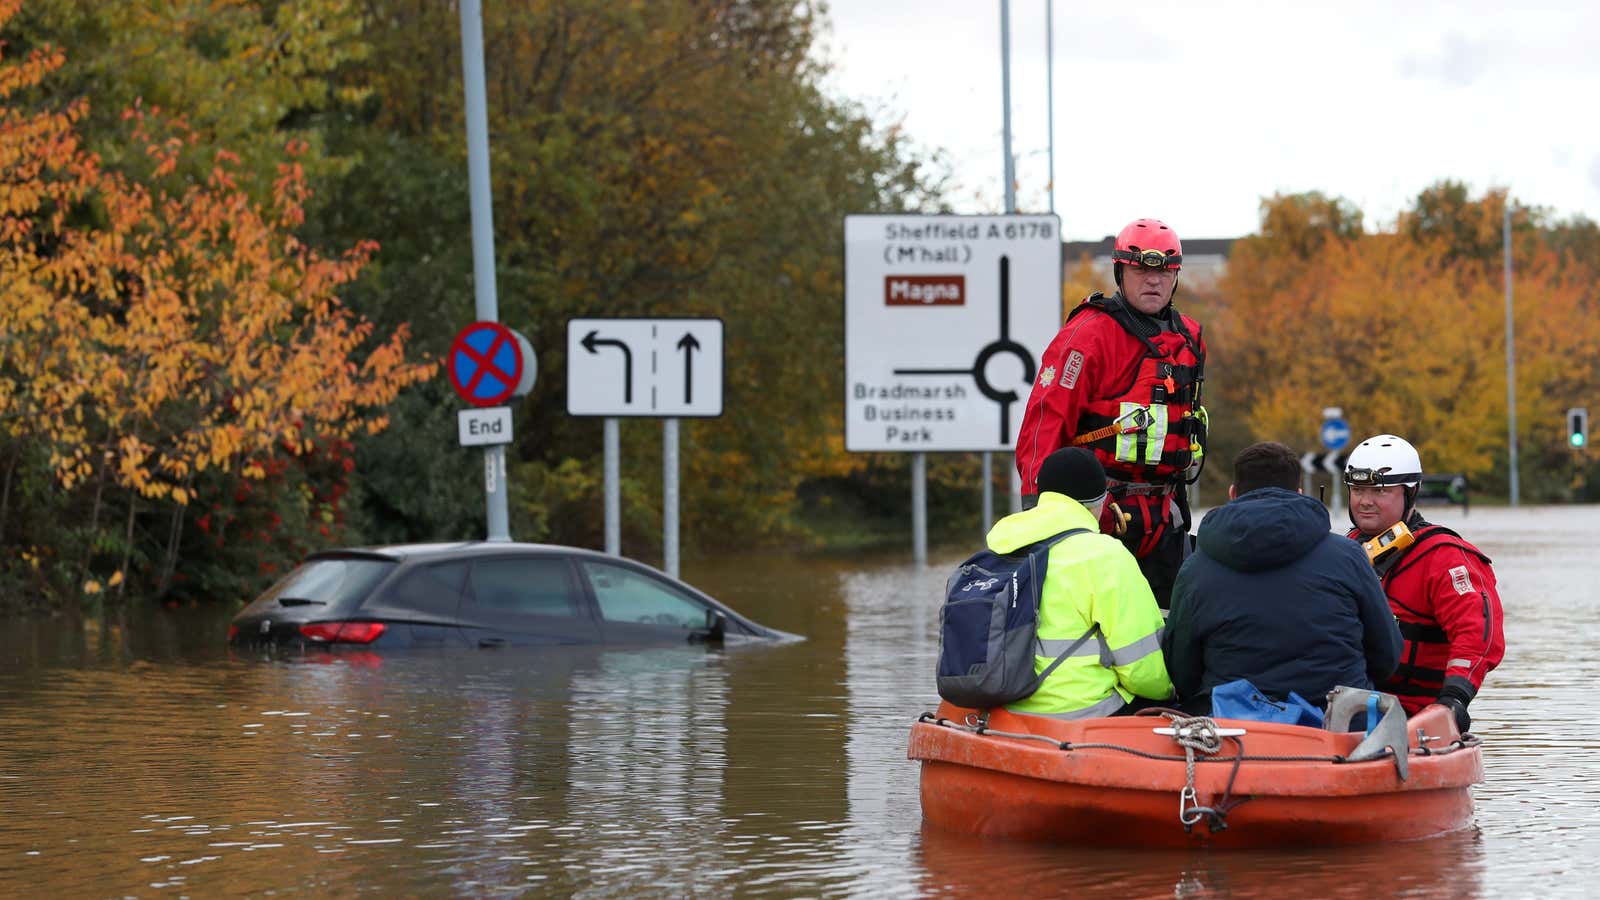 Many people in flood-hit areas have said that the floods are unprecedented.